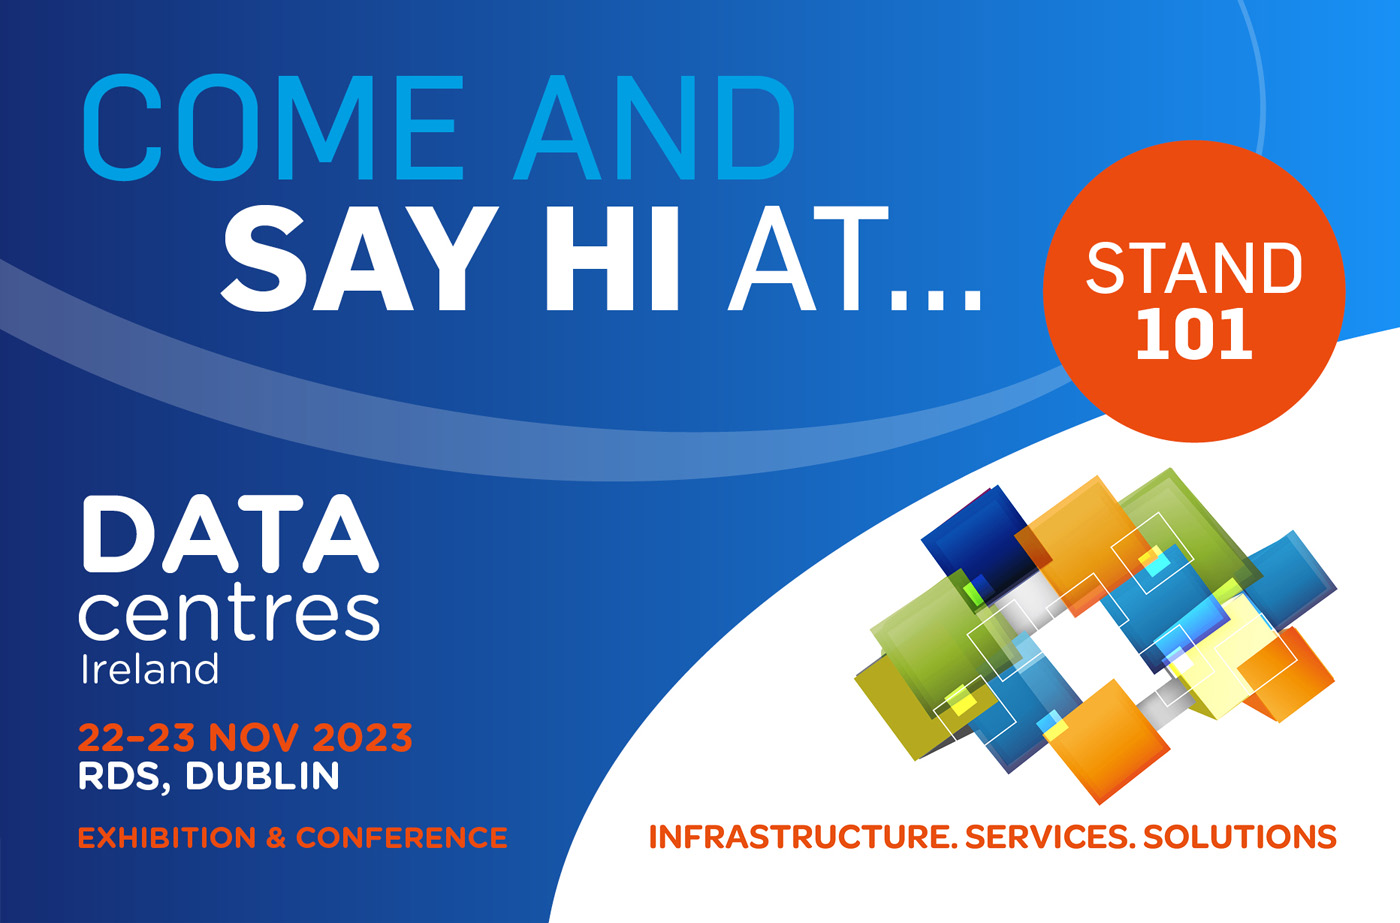 Carrier Rental Systems are exhibiting at this years Data Centres Ireland Show